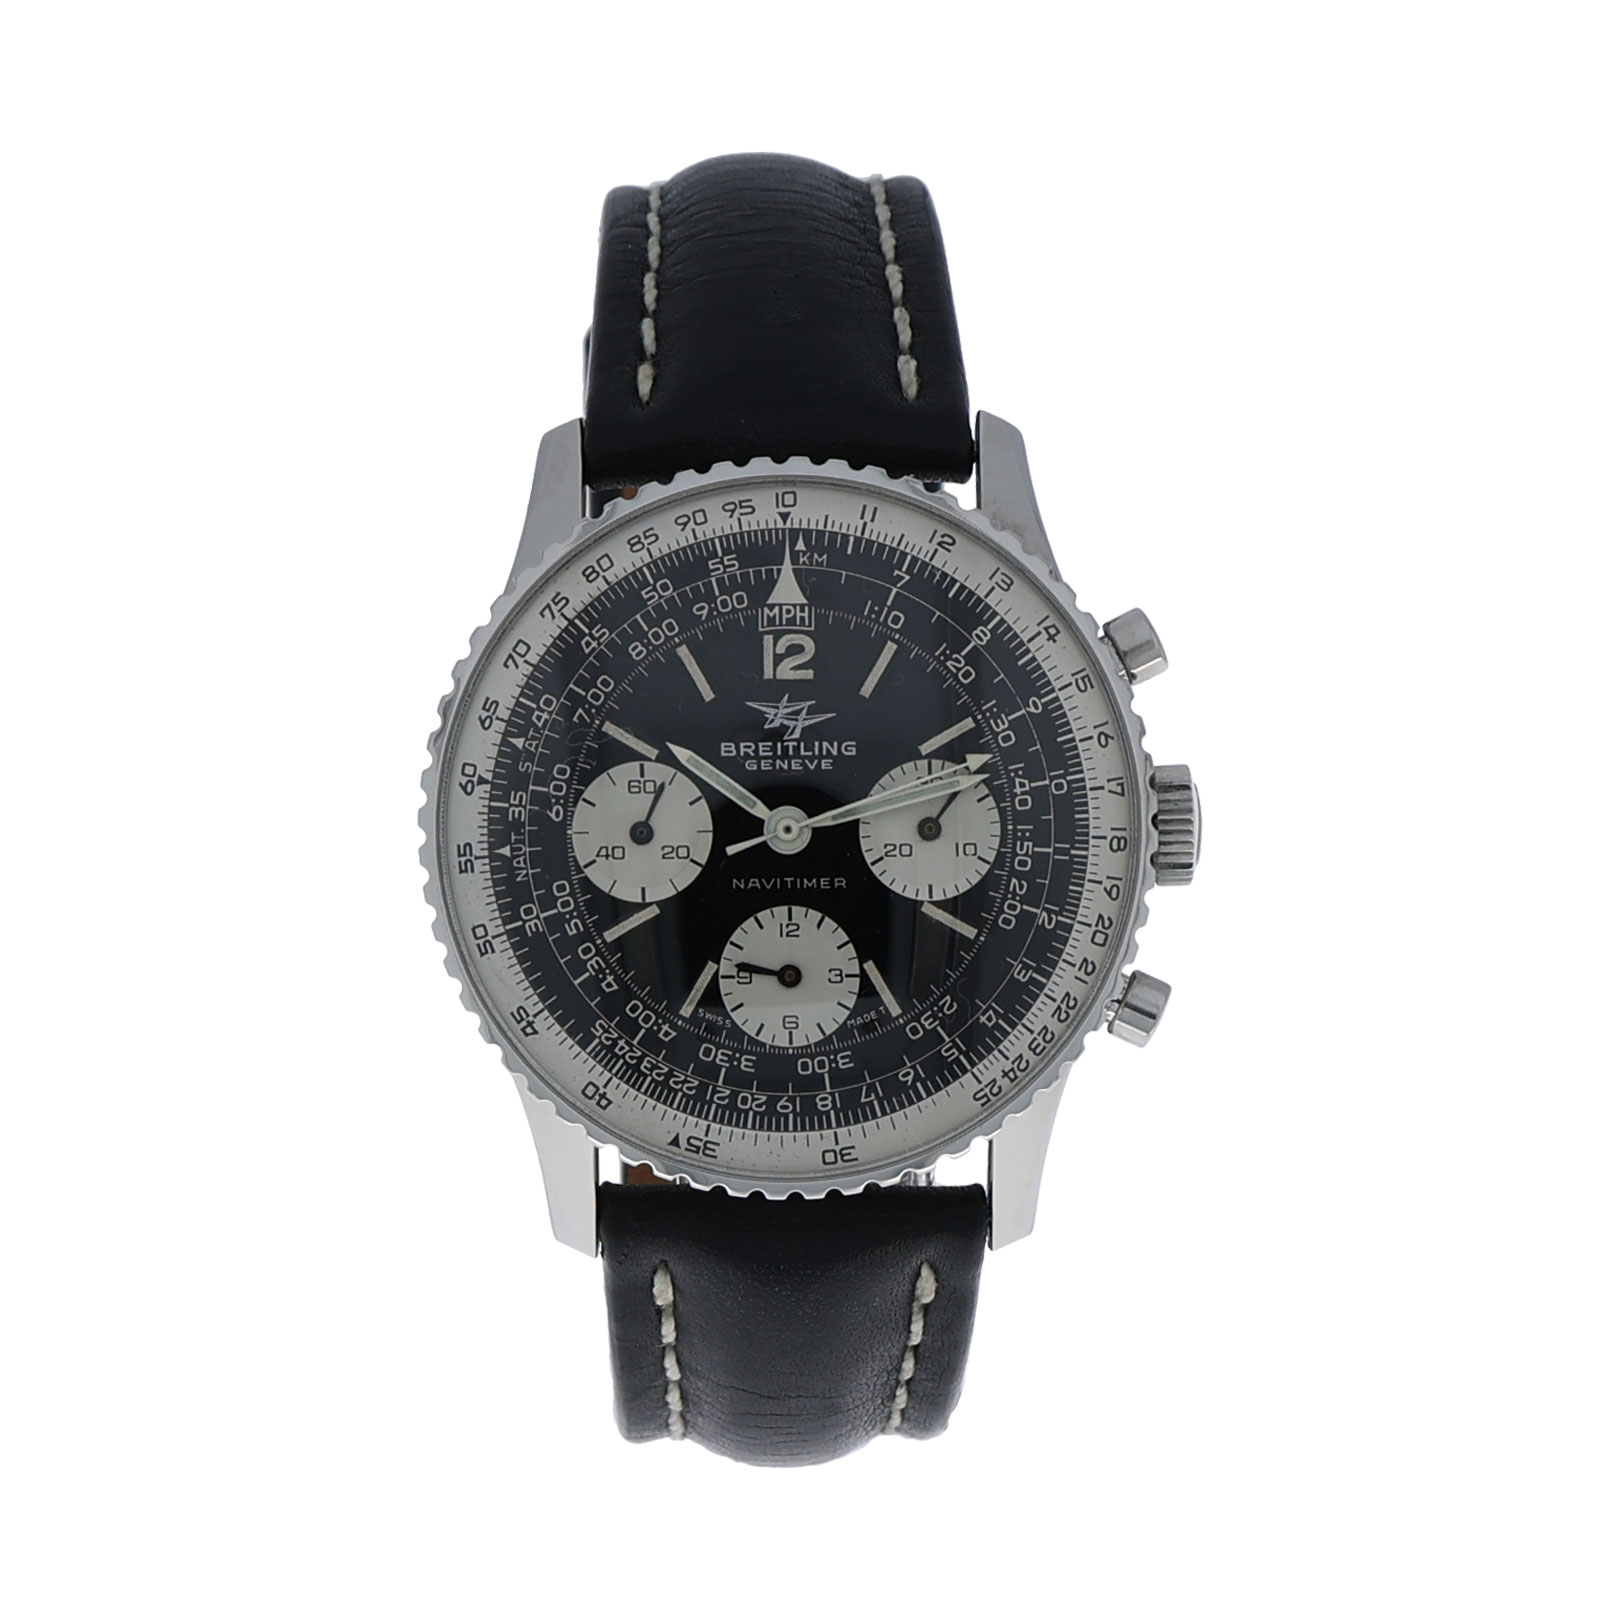 Breitling Navitimer 806 Venus 178 ca. 1960 in mint condition